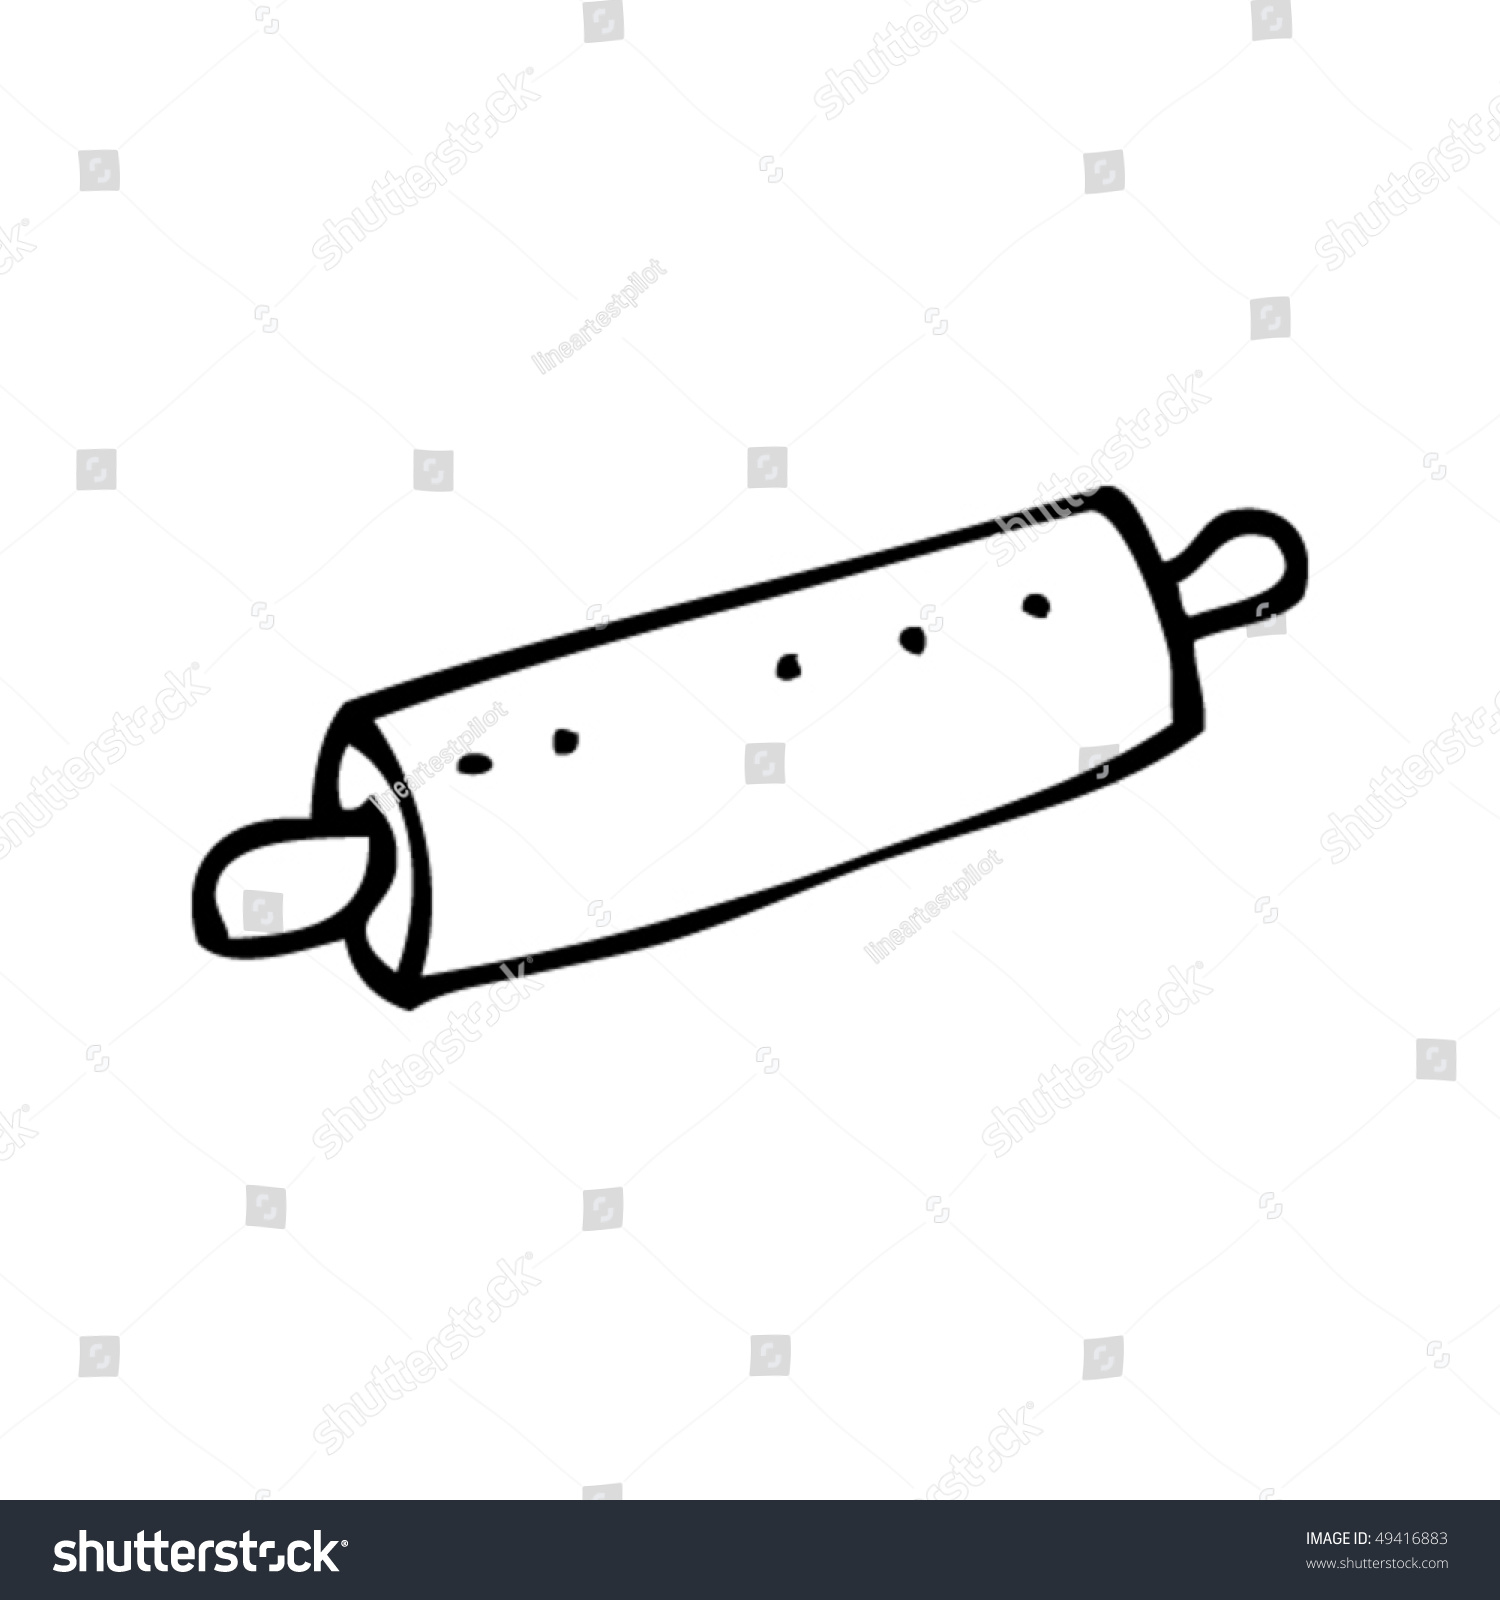 Quirky Drawing Of A Rolling Pin 스톡 벡터 49416883 : Shutterstock